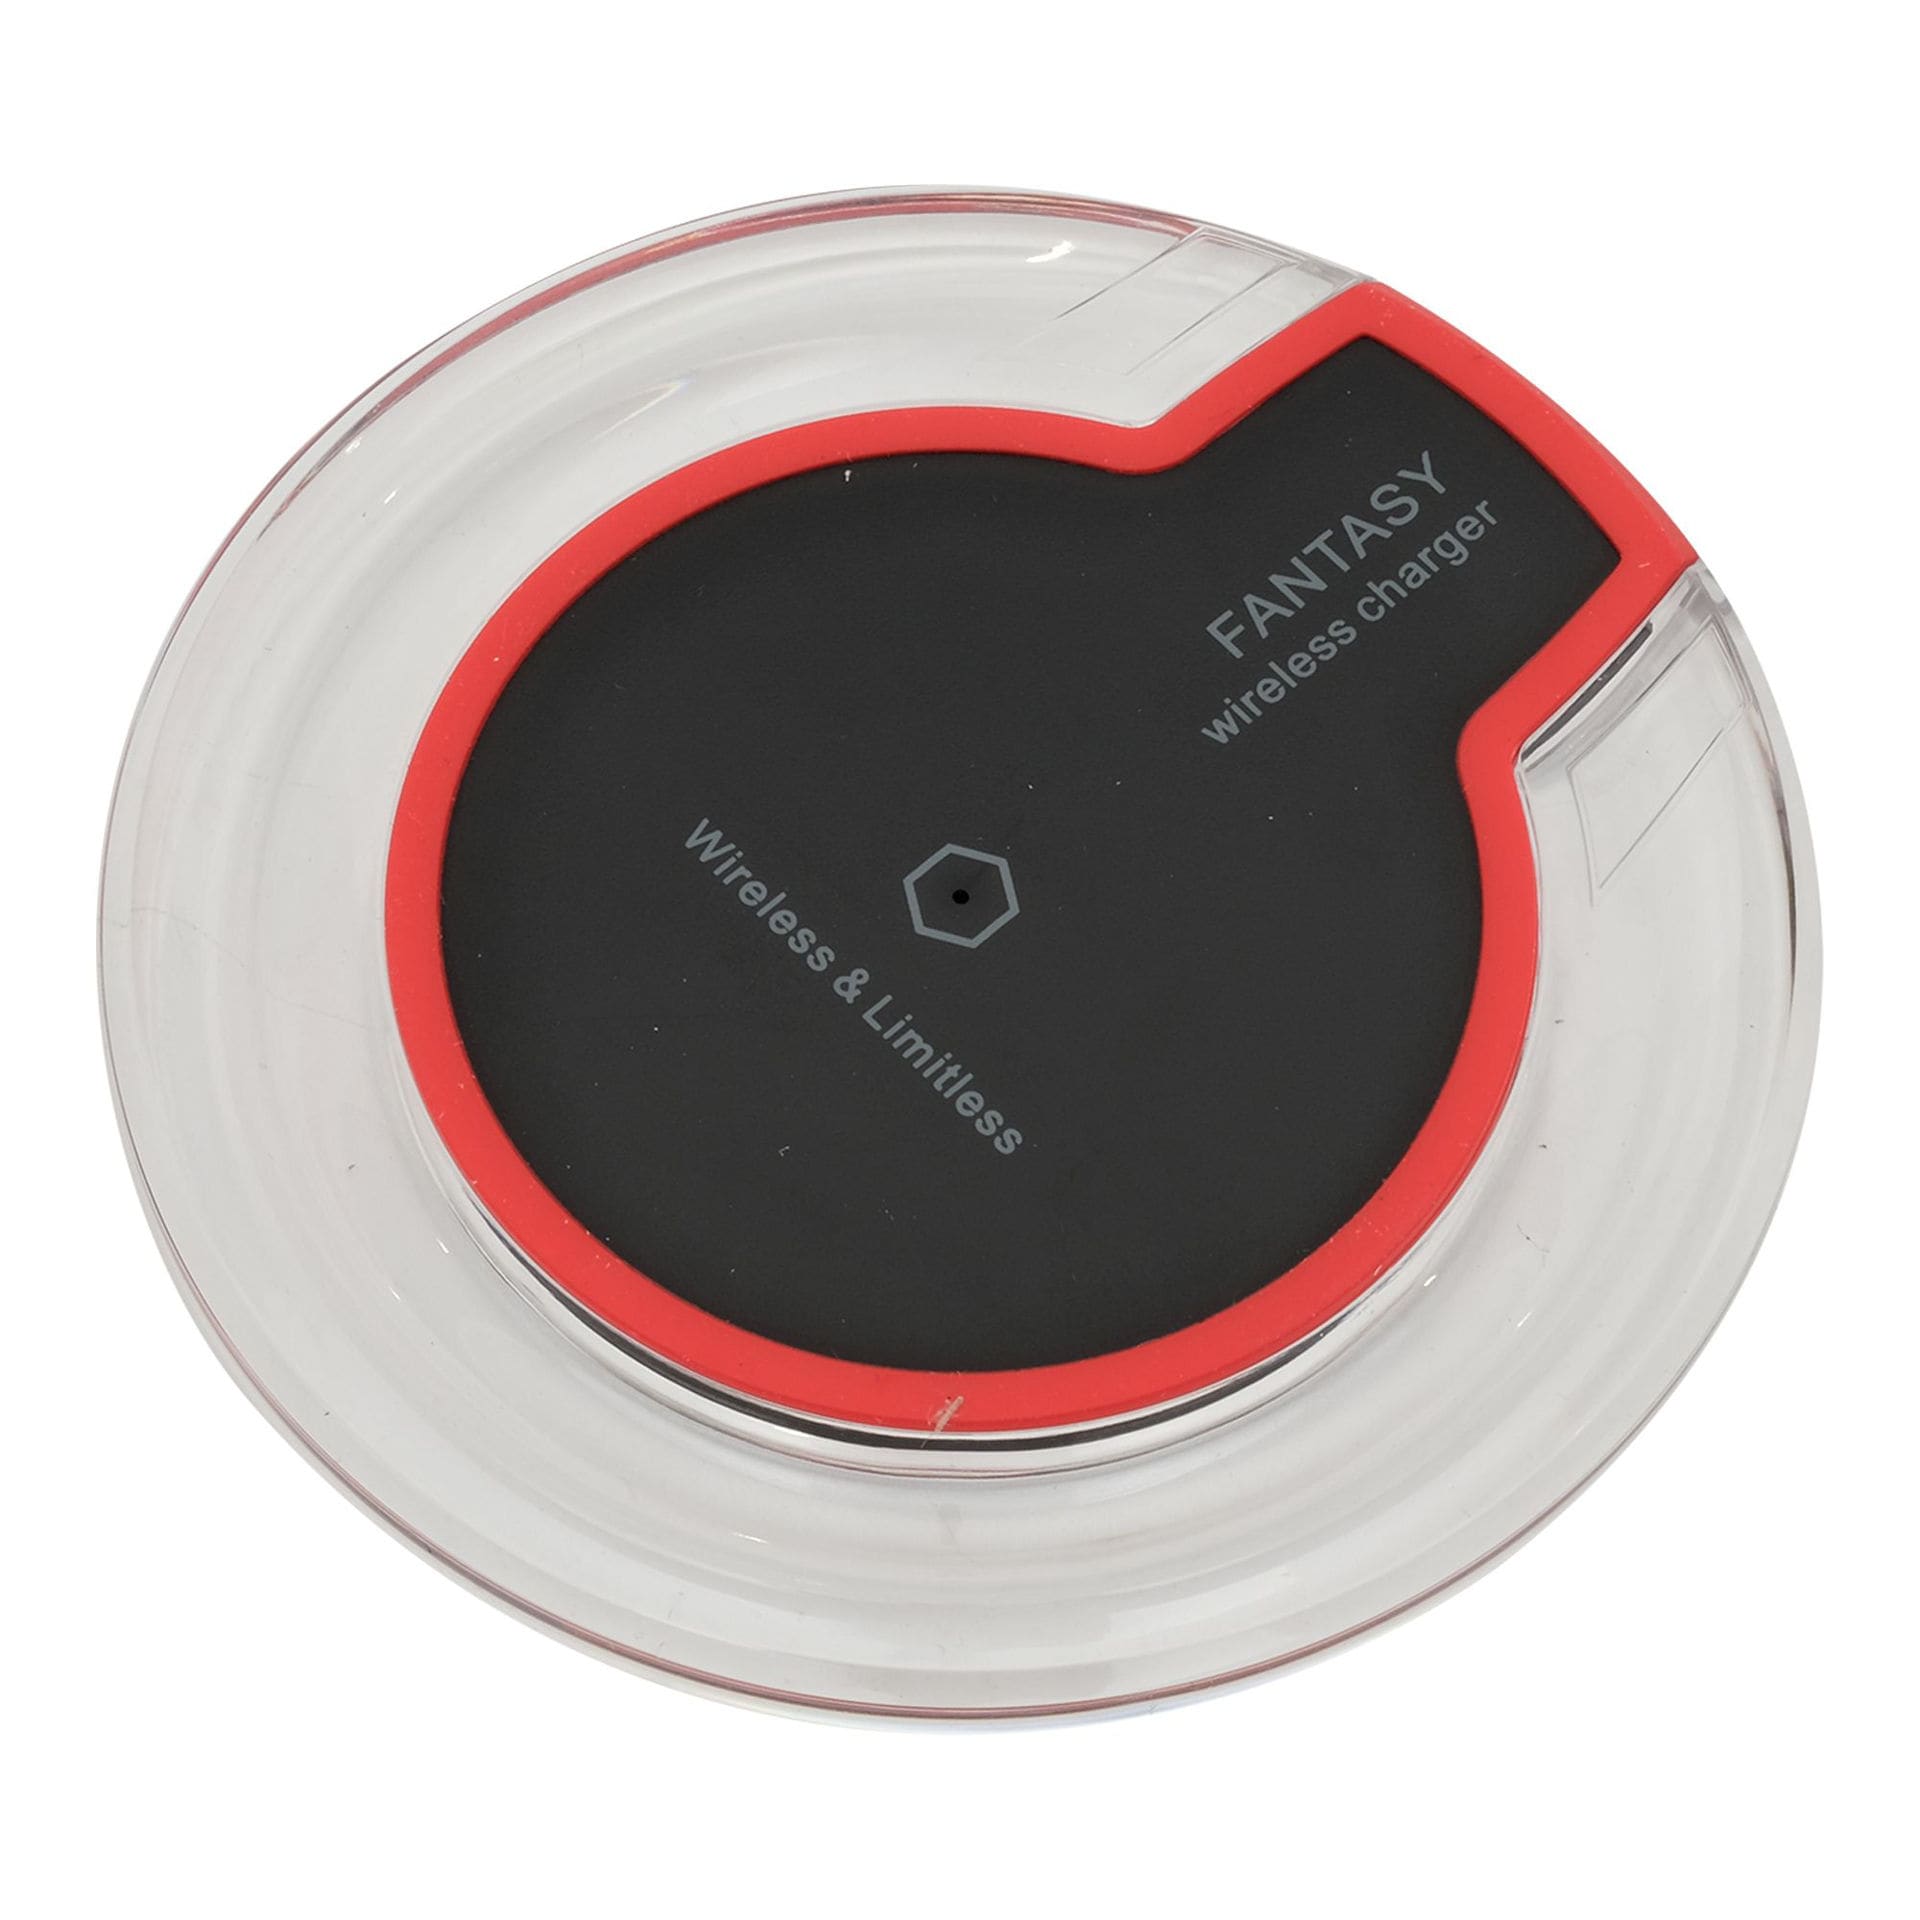 Shop Lawano Fantasy Wireless Charger - Black and Red | Dragon Mart UAE